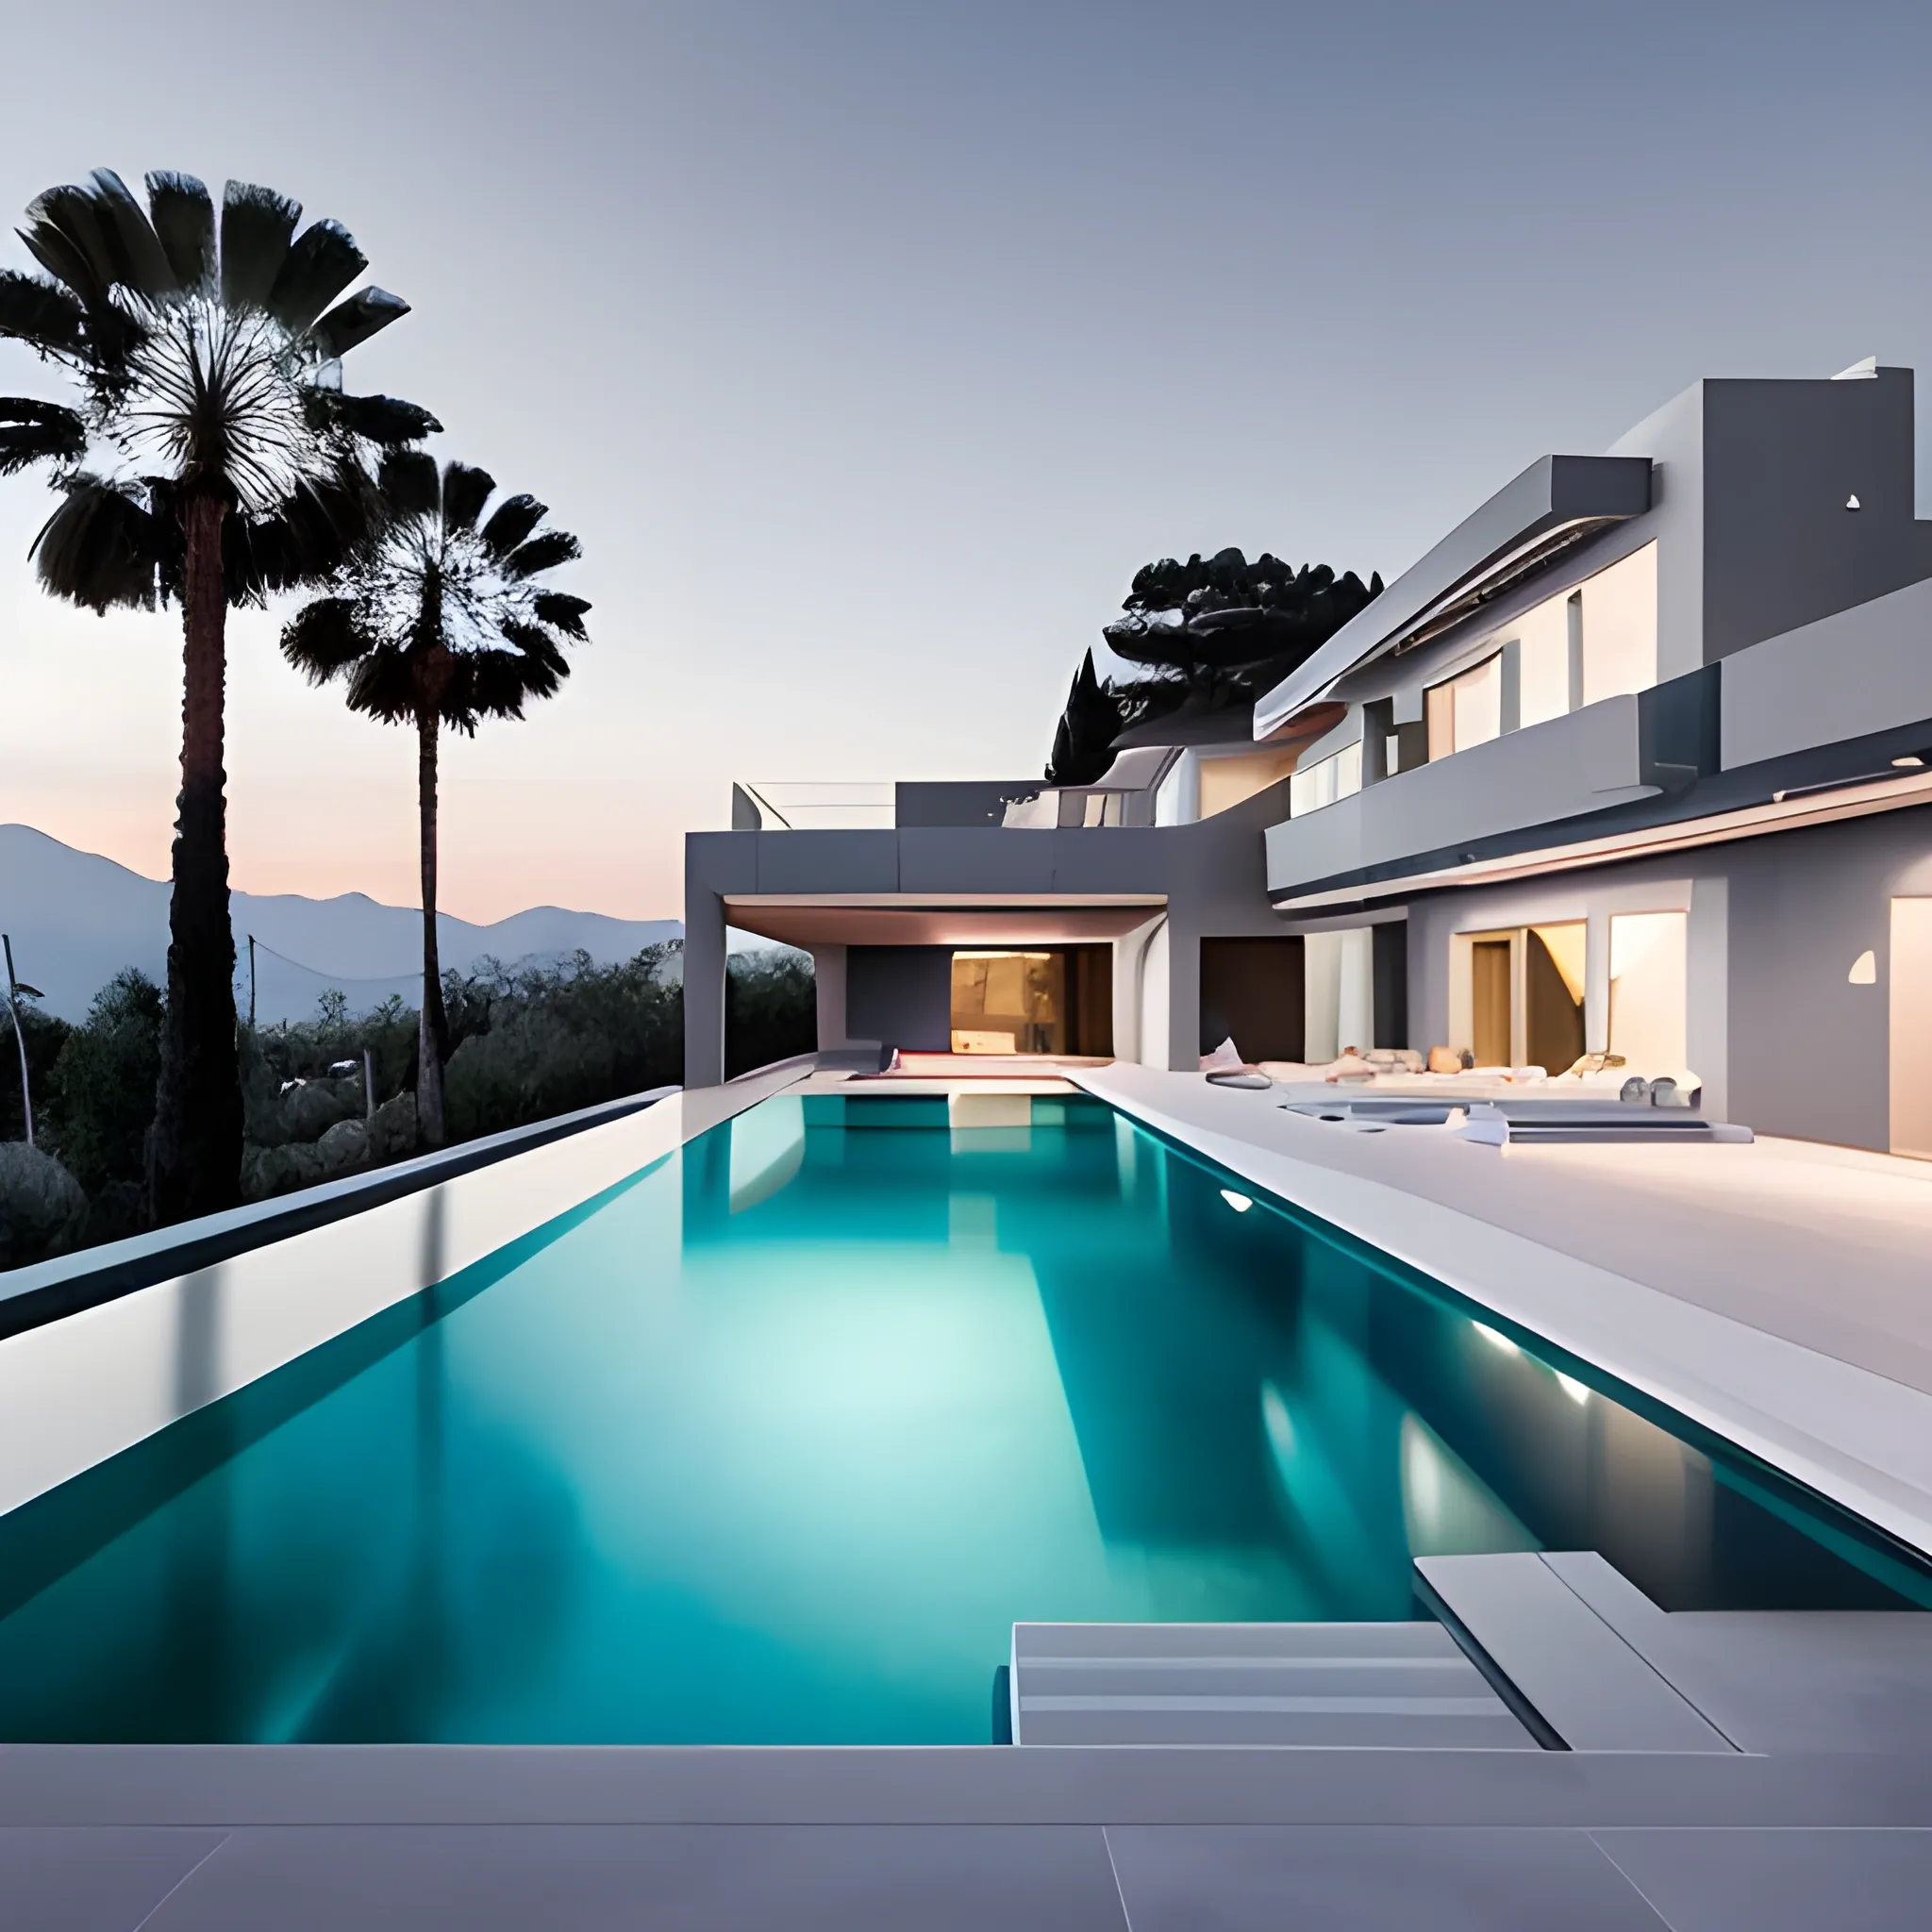 A modern villa in dark grey color with infinity pool overlooking the mount canigou. A palm tree on the right side of the pool. 
